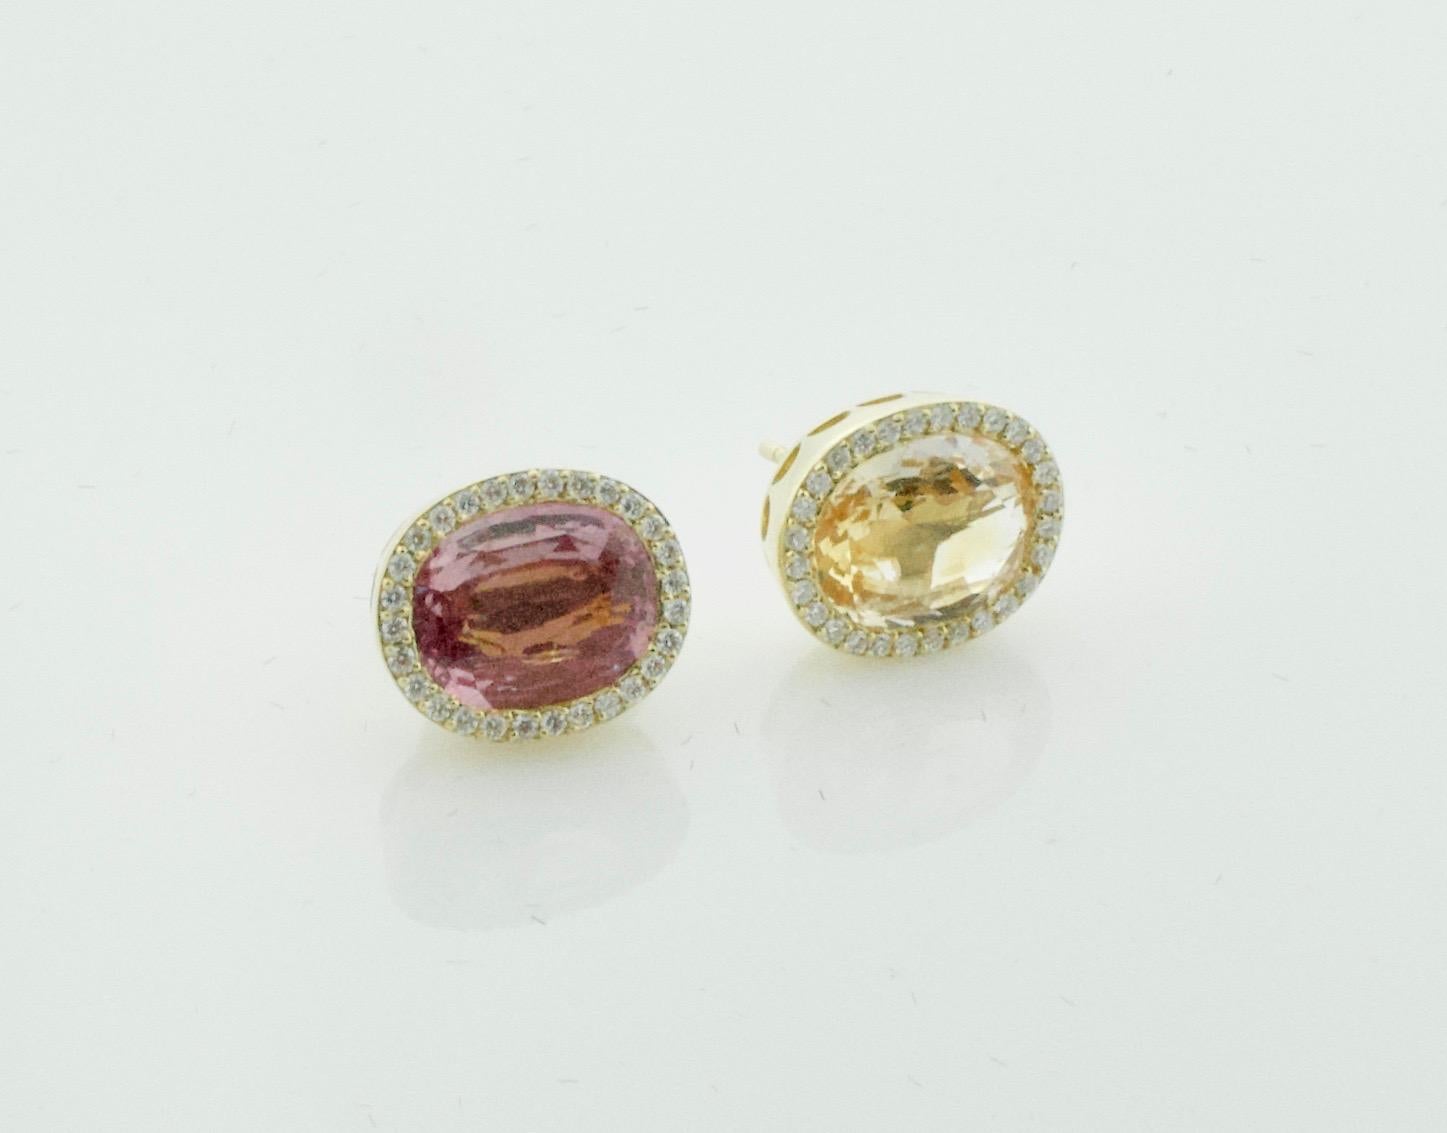 Multi Colored Sapphire and Diamond Earrings in 18k Yellow Gold
Your Eyes Are Not Playing Tricks
These Earrings Have Different Colored Sapphire on Each Ear
One Oval Cut Pink sapphire Weighing 3.00 Carts Approximately   
One Oval Cut Golden sapphire